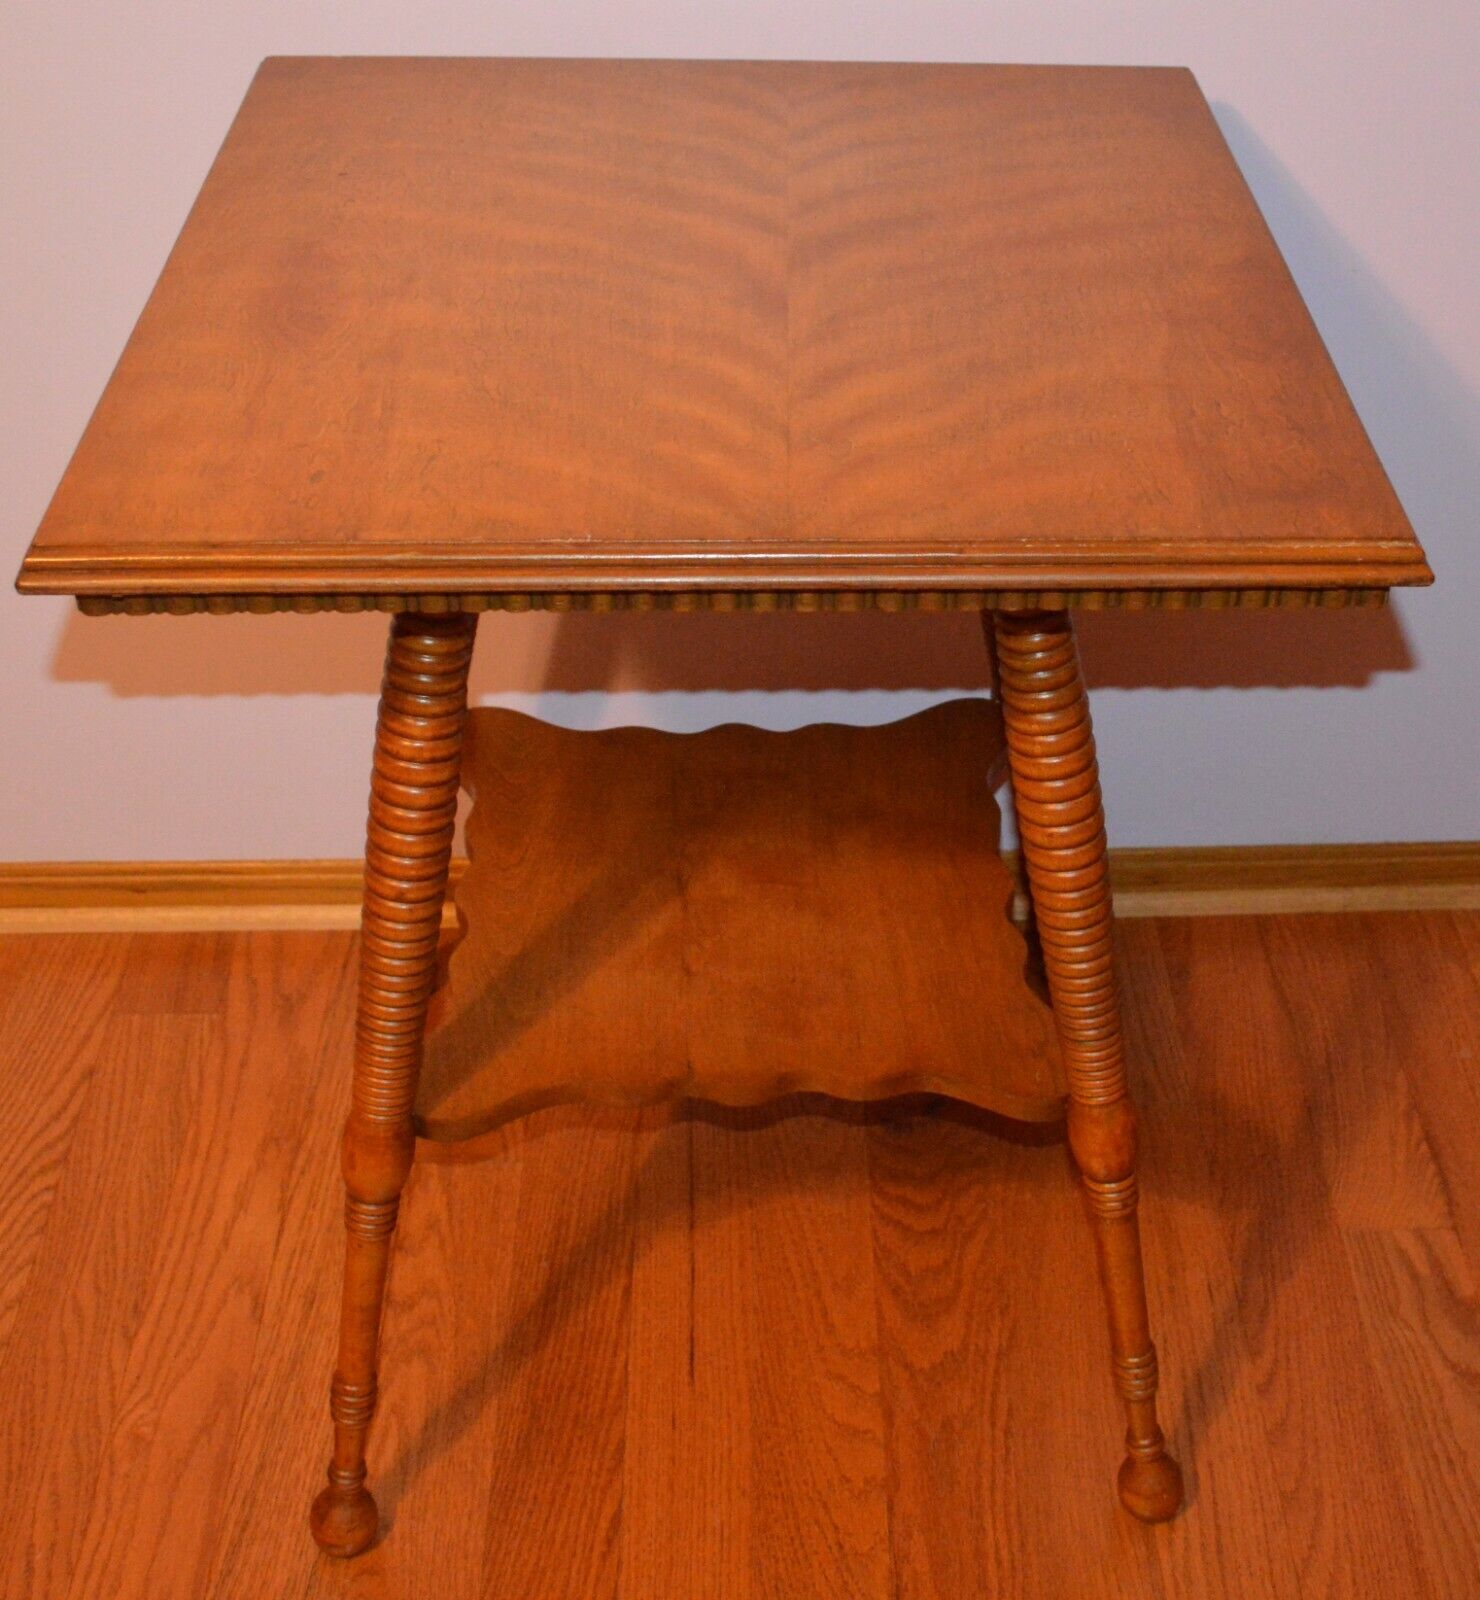 VINTAGE ANTIQUE 2 TIER SIDE PARLOR TABLE WITH TURNED LEGS